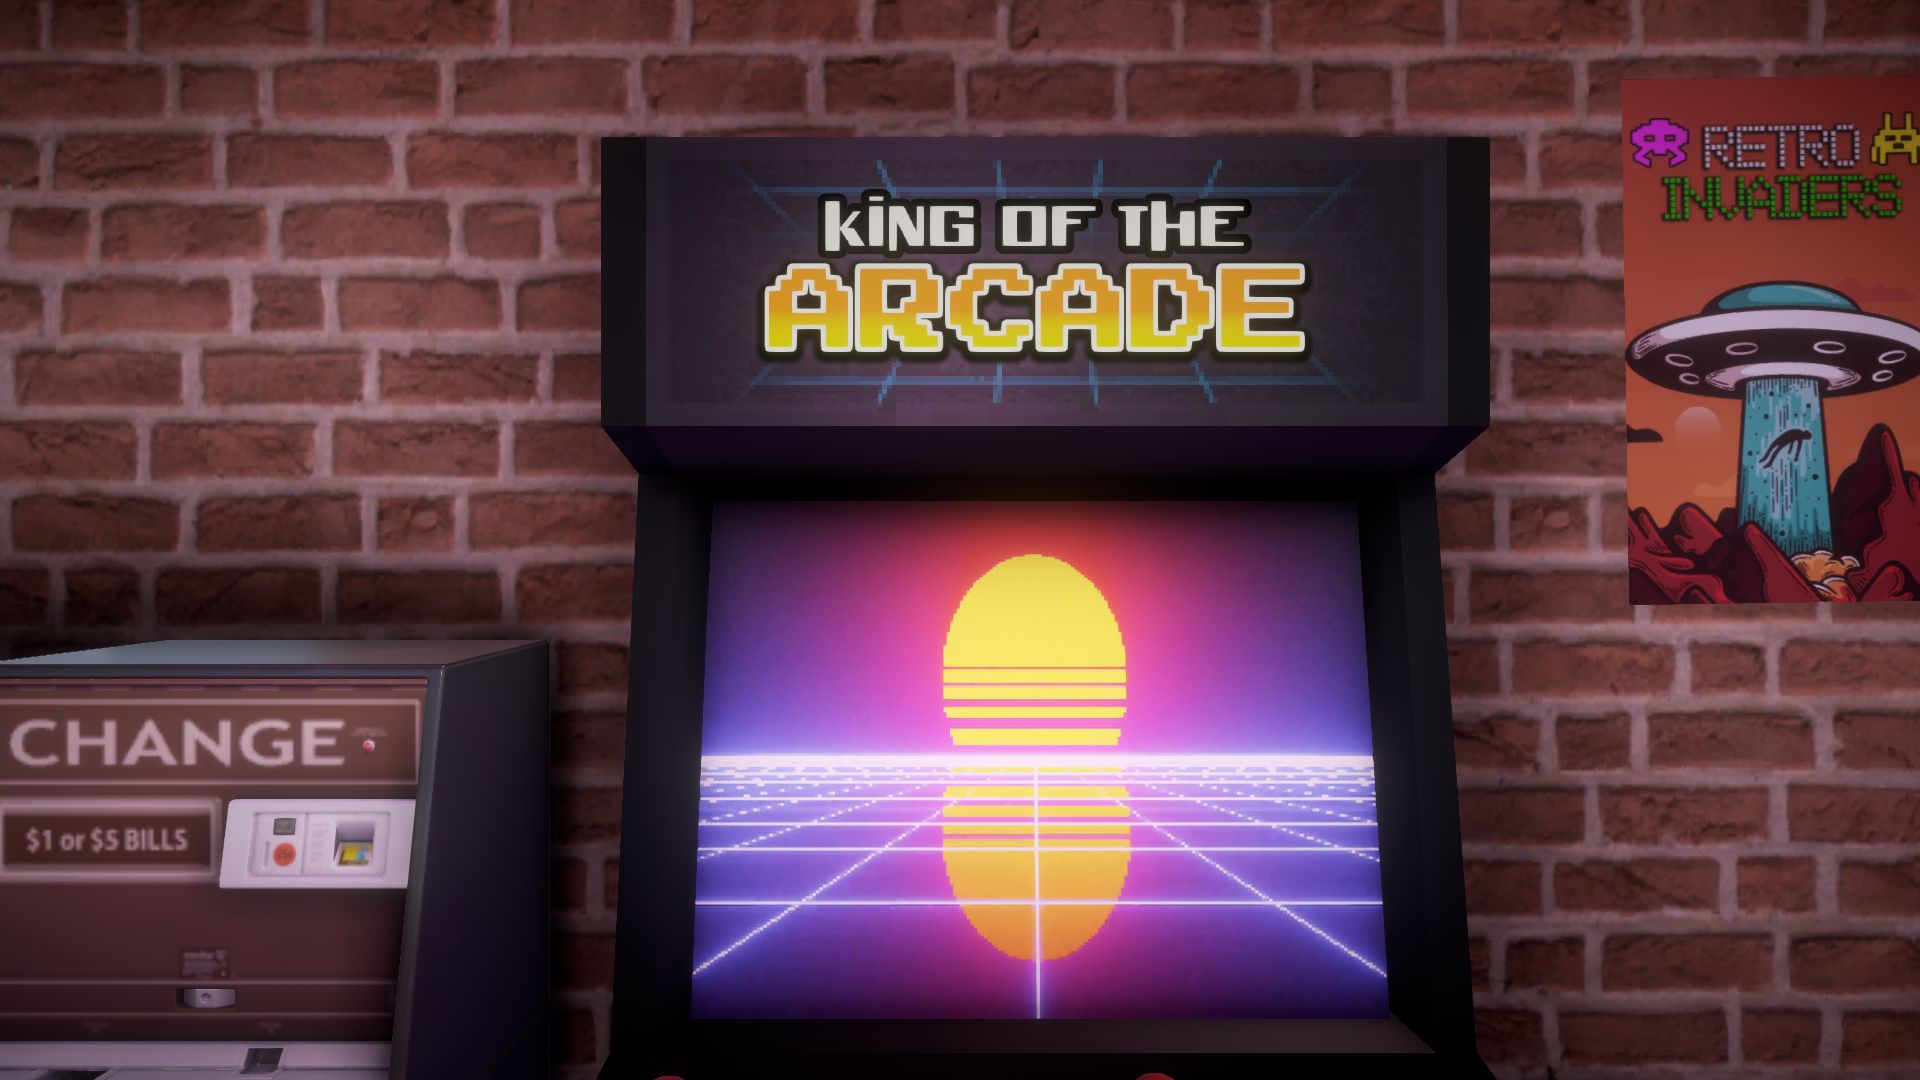 Where We’re Going, We Don’t Need Coins: King of the Arcade is Available Now on Xbox